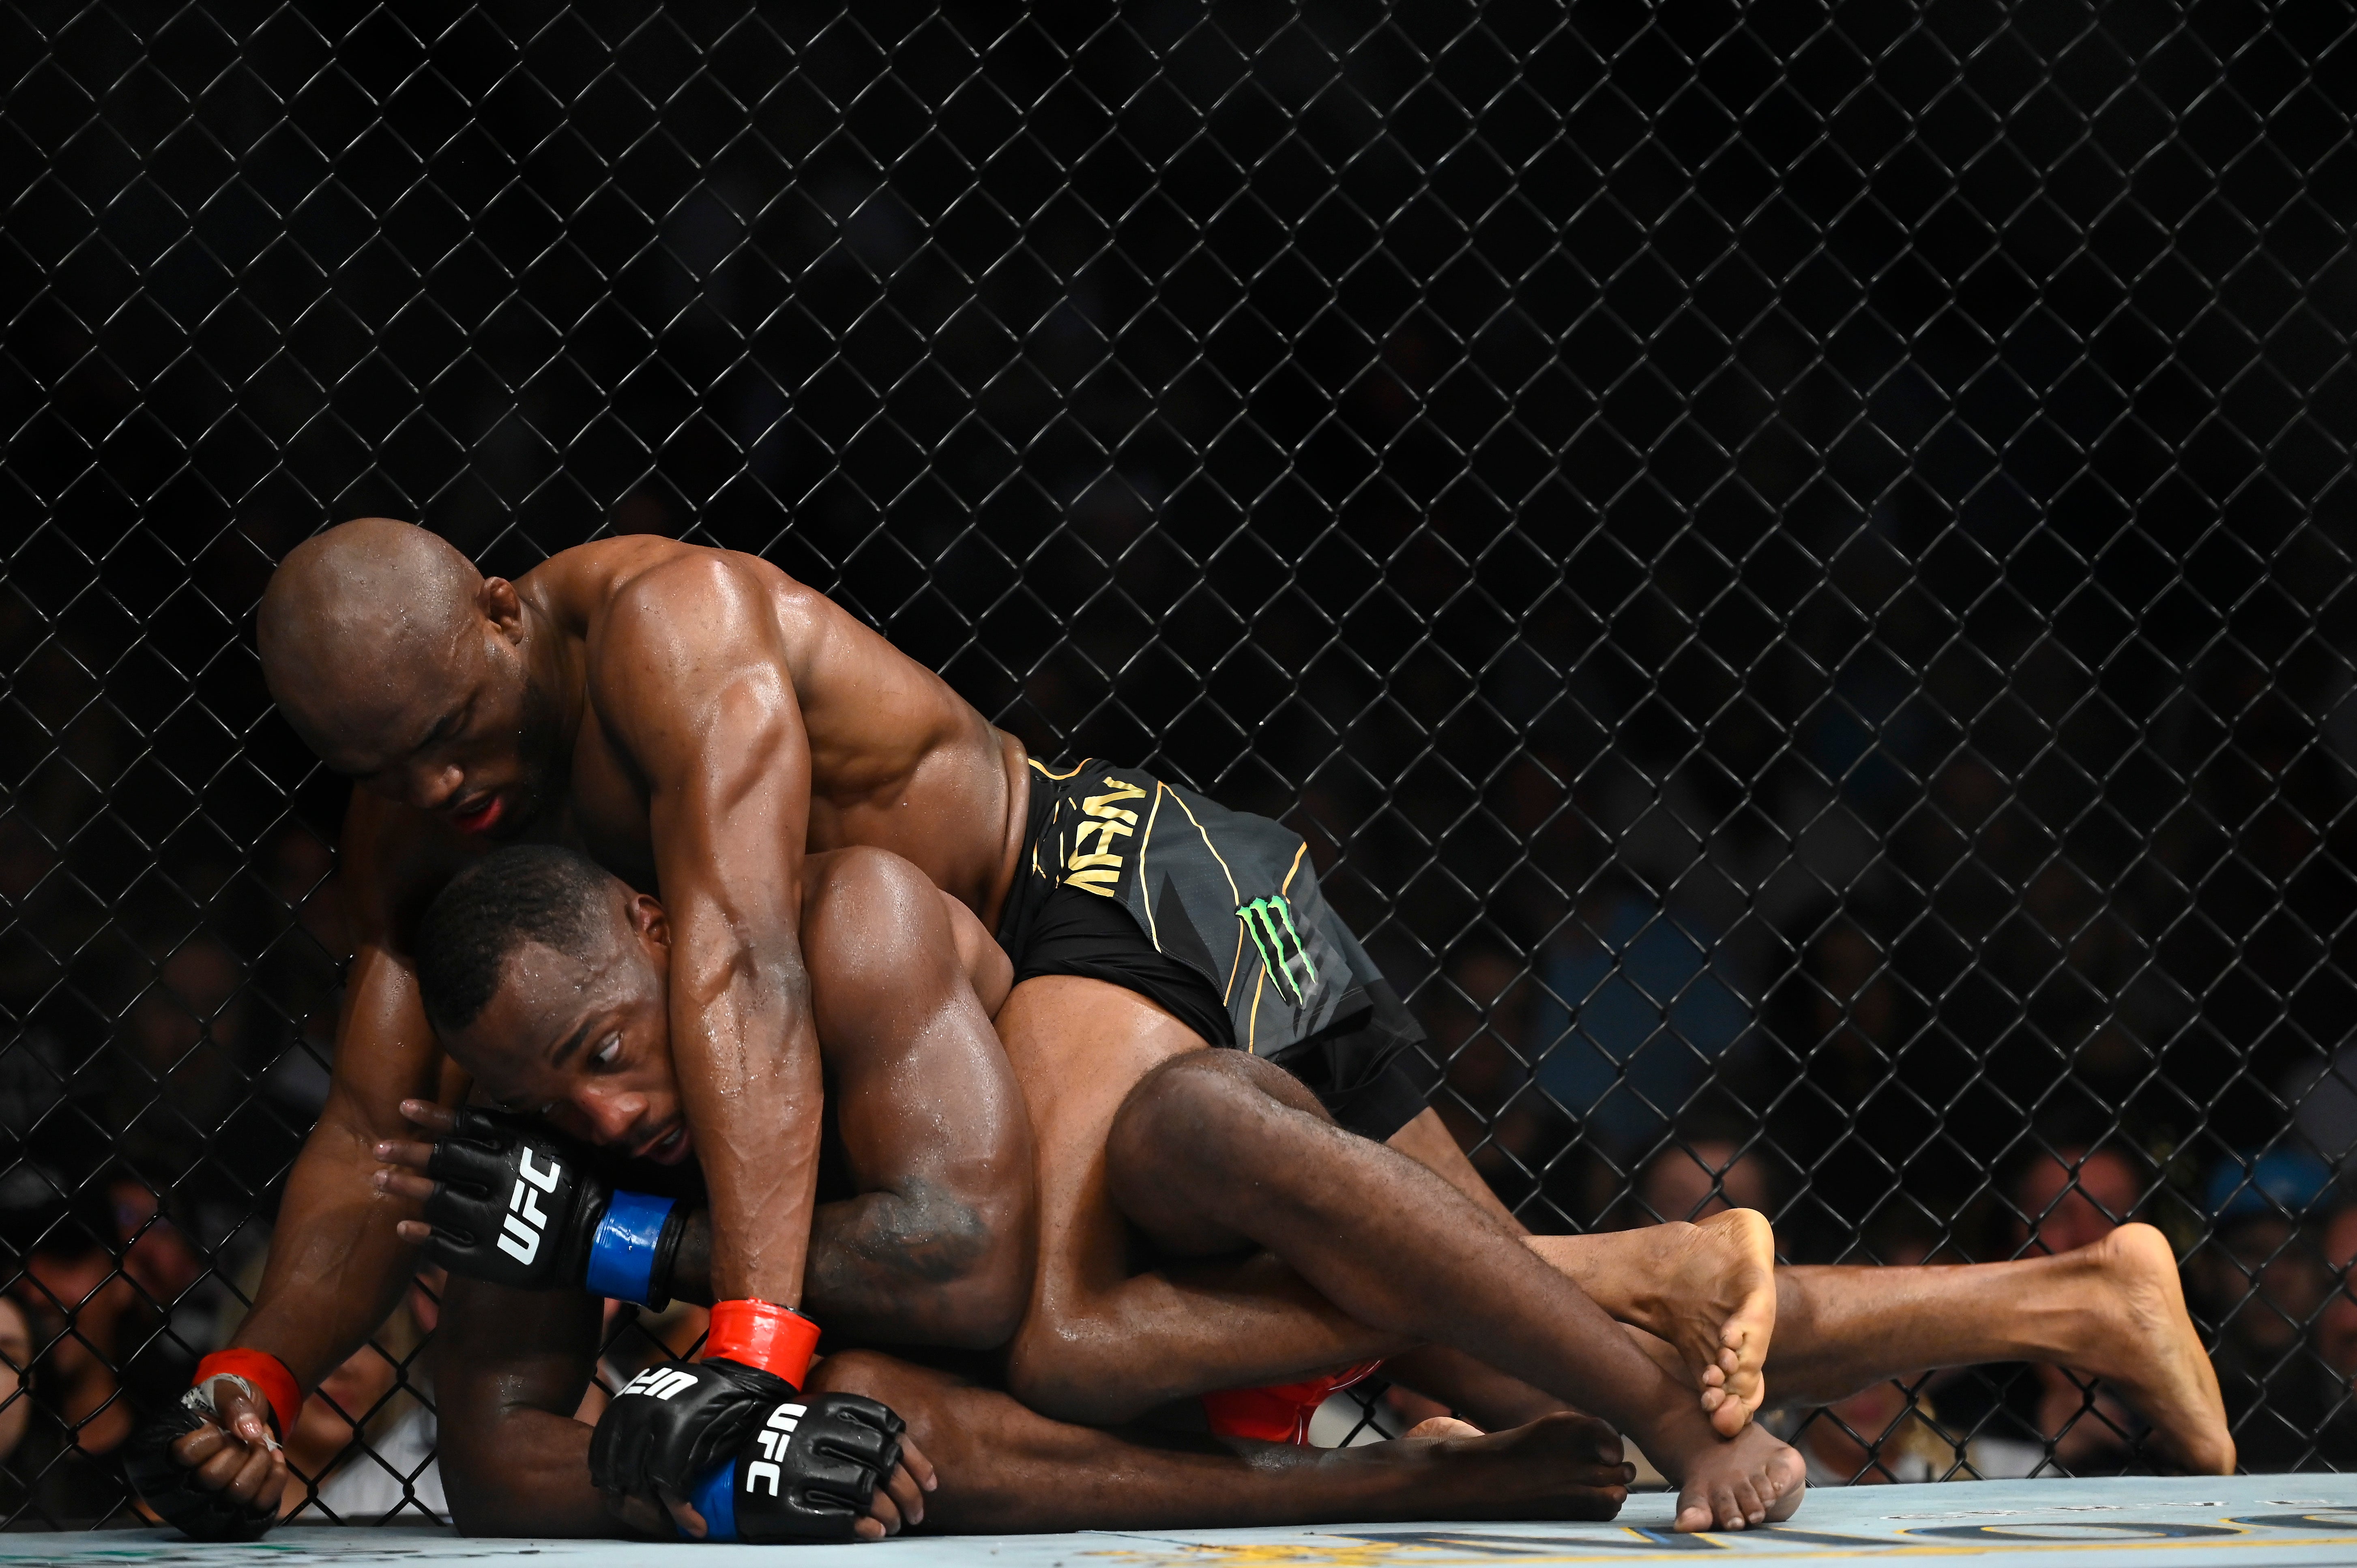 Kamaru Usman controlled Leon Edwards for much of their rematch, until the Briton secured a late knockout